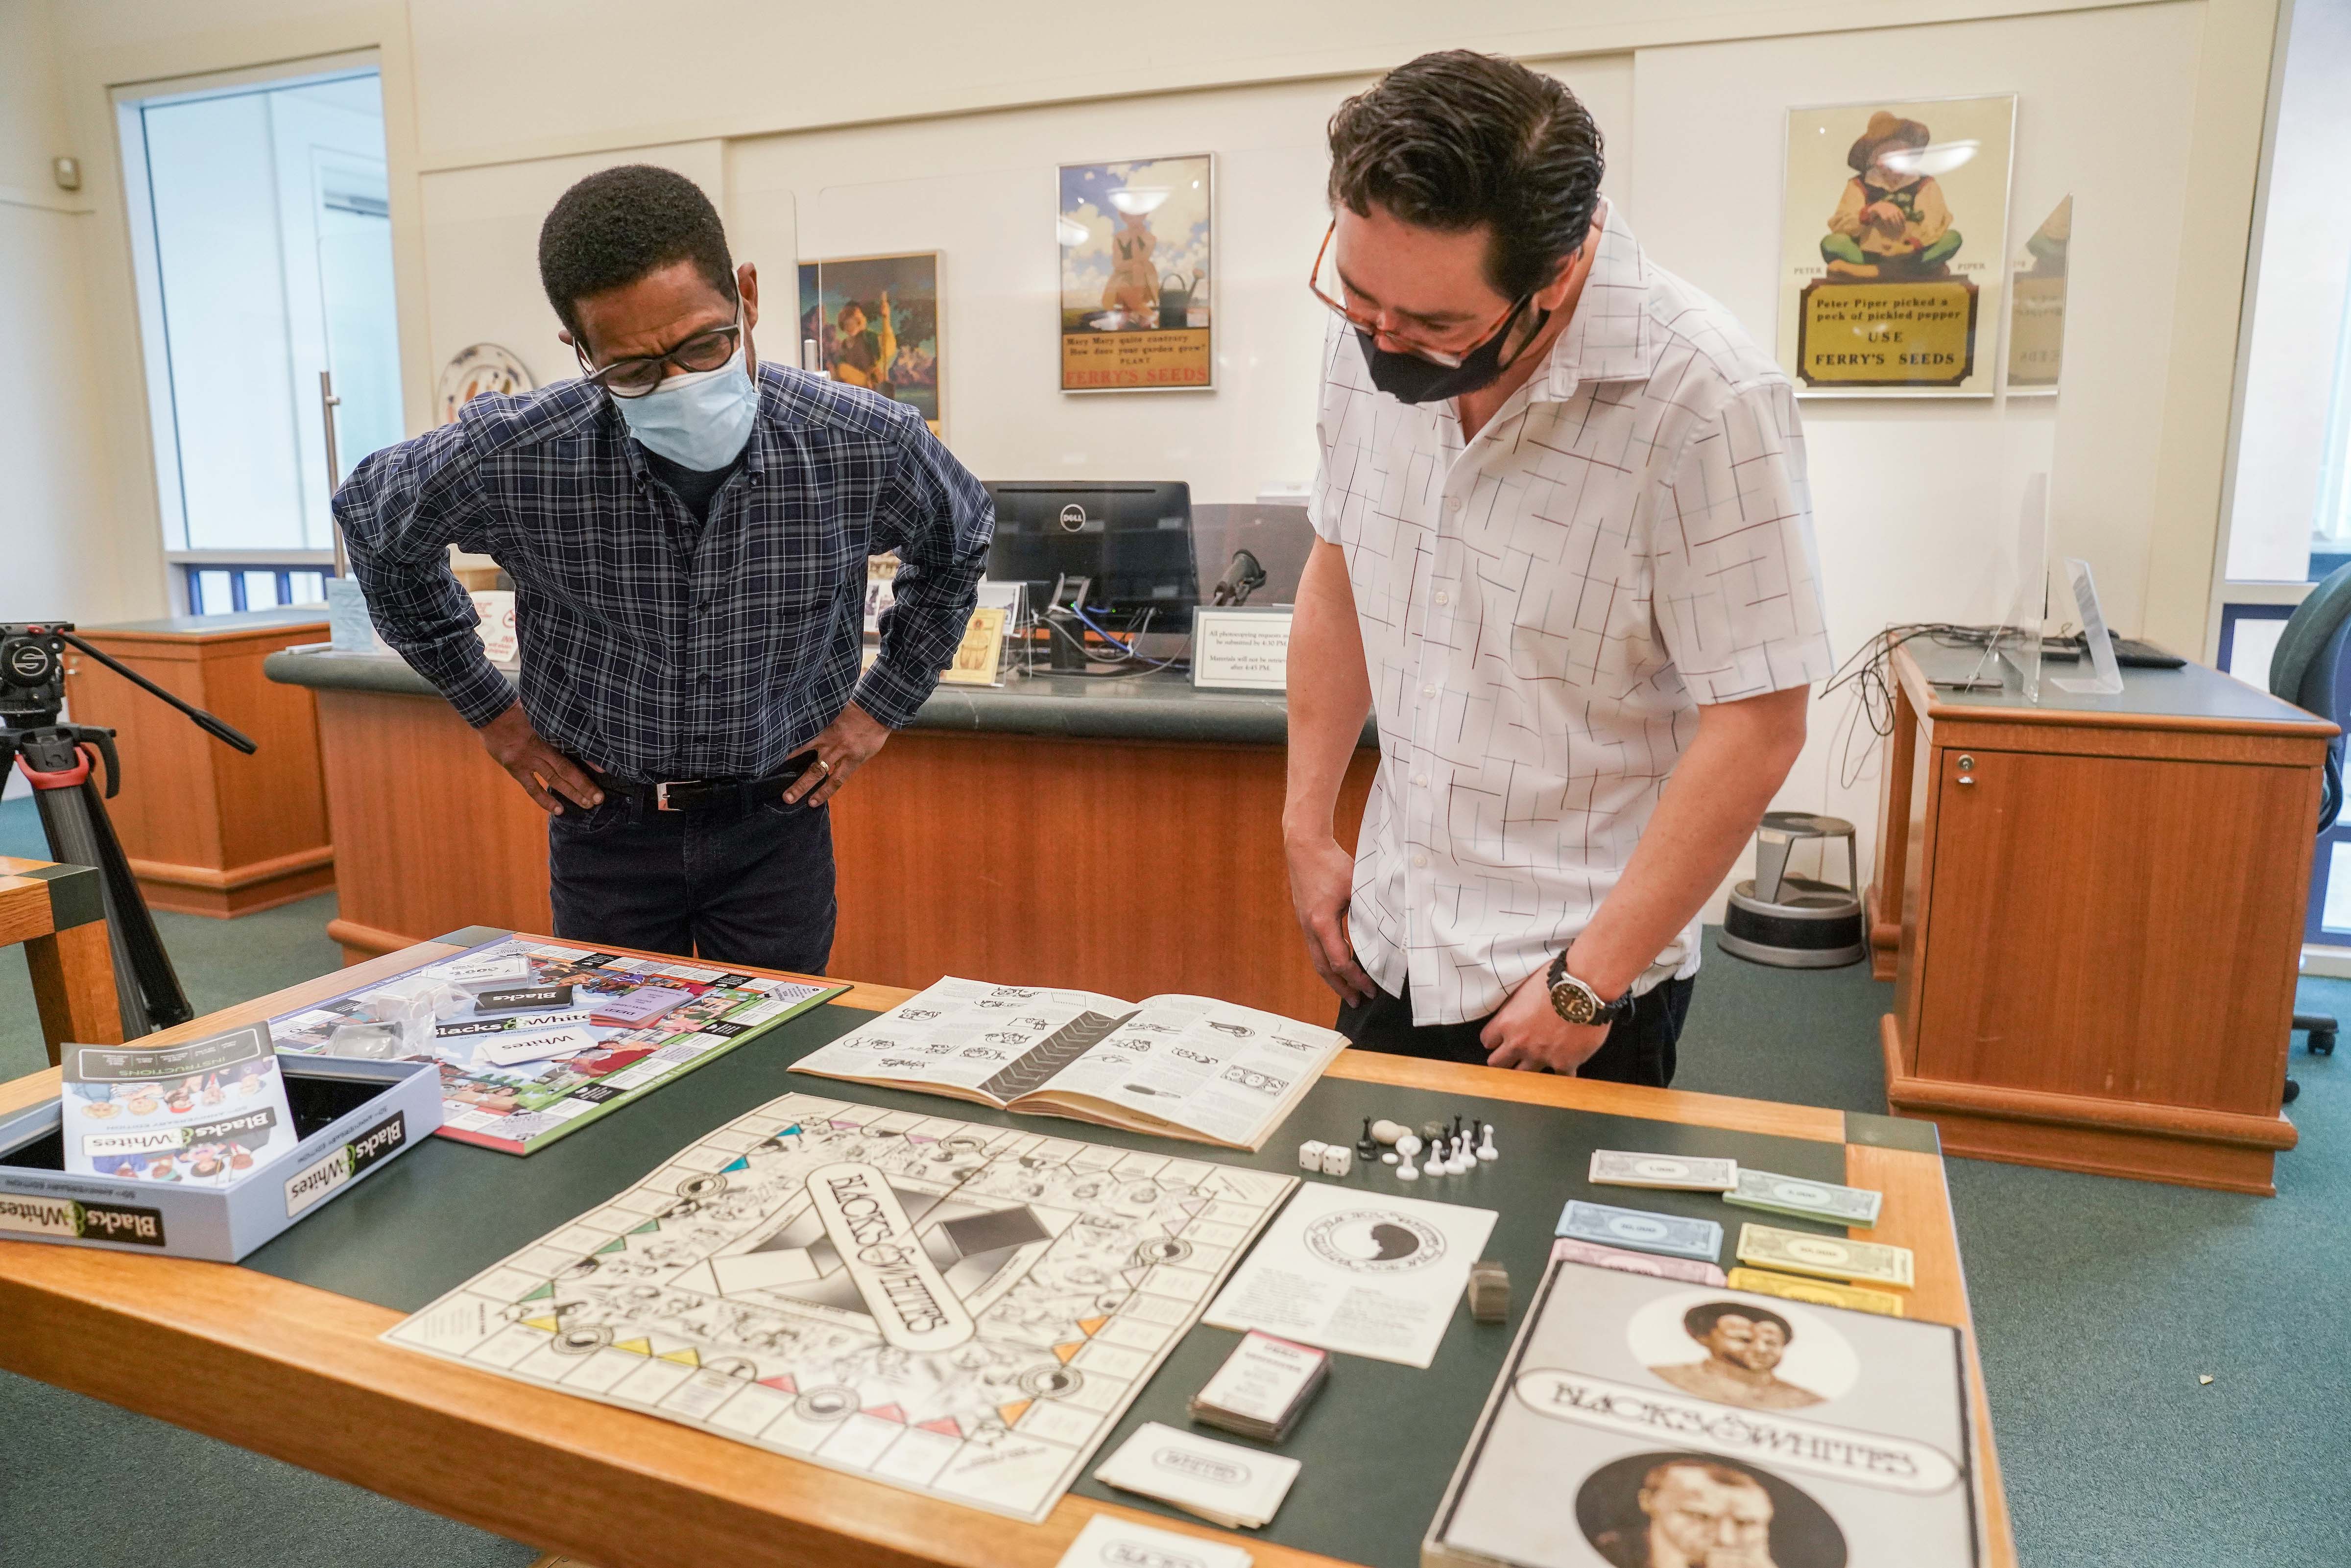 Two men look at two versions of the Blacks & Whites games that are spread out on a table